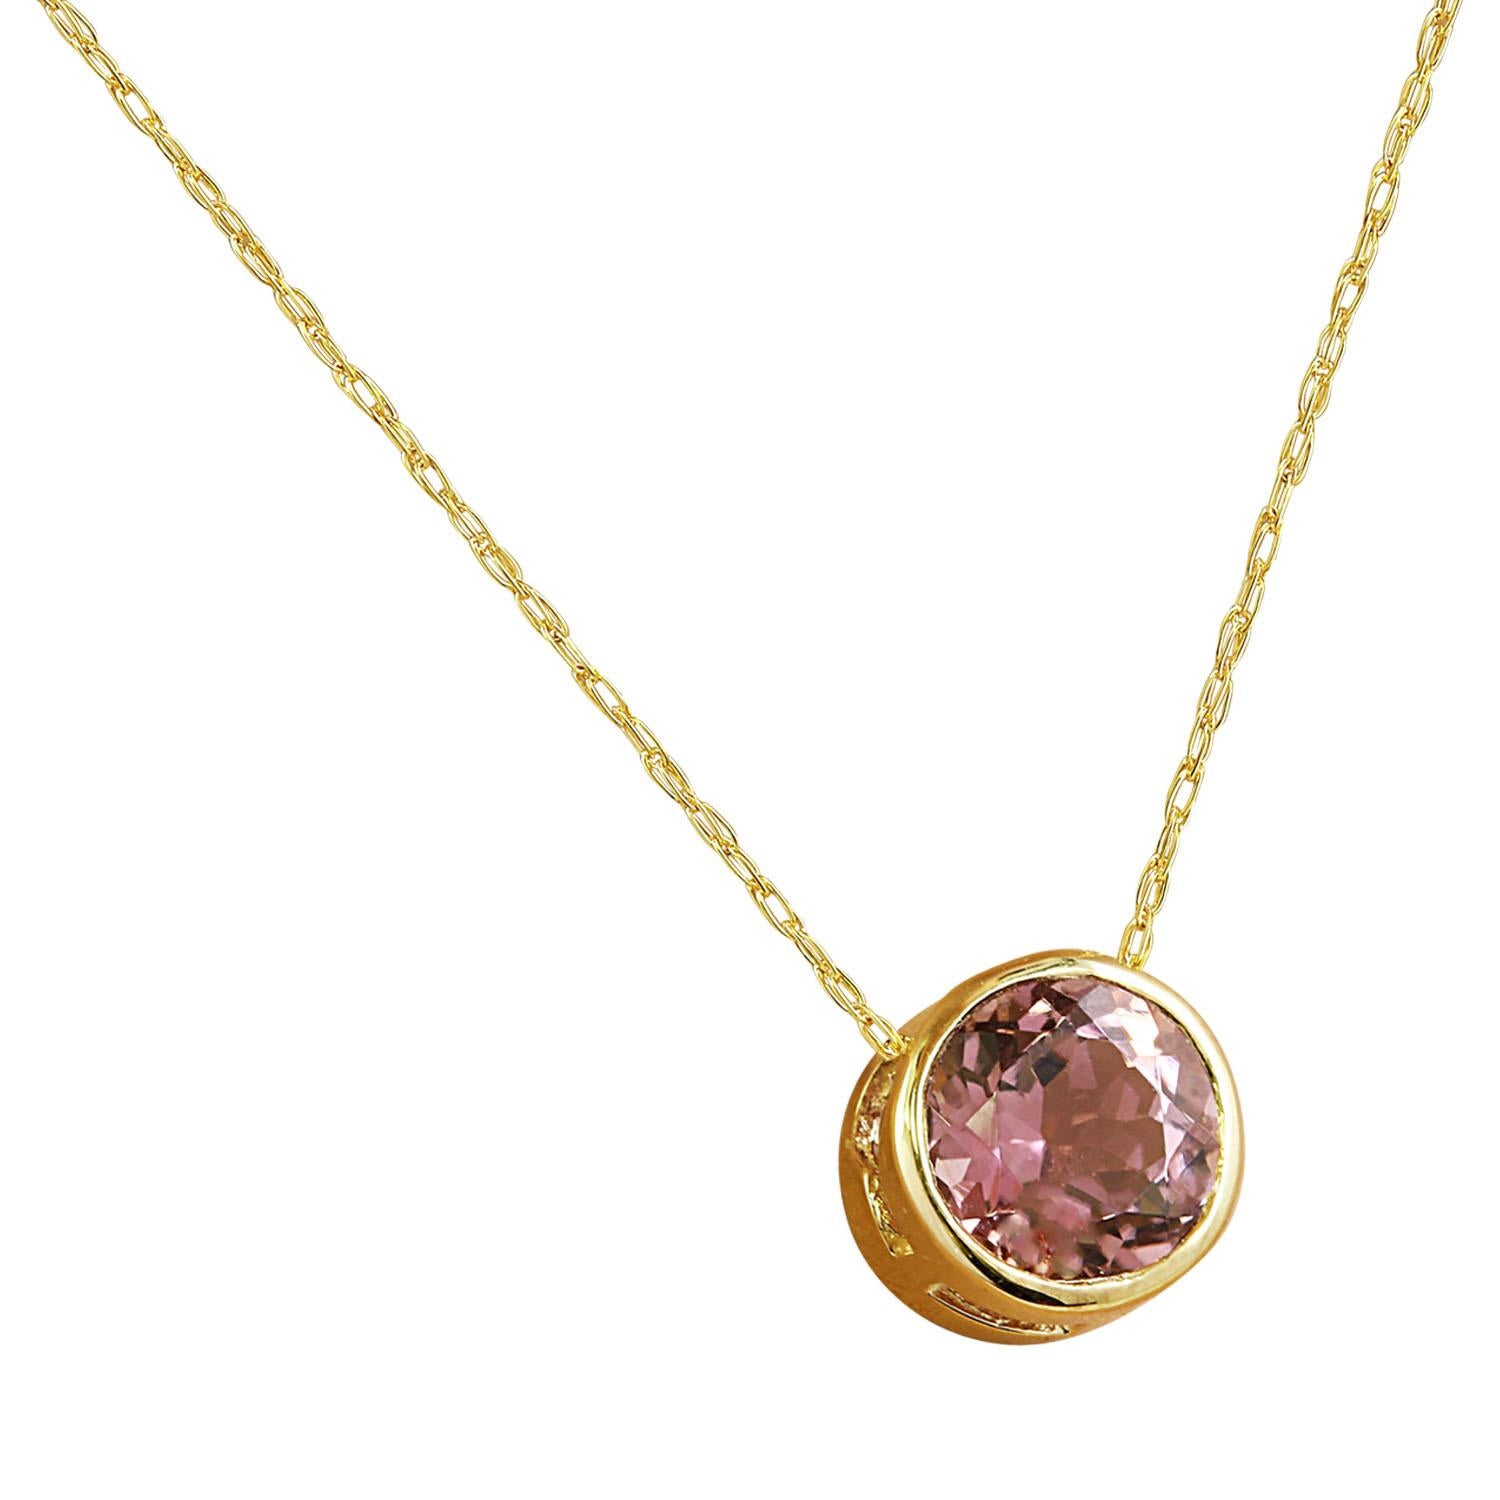 1.50 Carat Tourmaline 14K Yellow Gold Necklace
Stamped: 14K
Total Necklace Weight: 1.4 Grams
Length: 16 Inches
Tourmaline Weight: 1.50 Carat (6.50x6.50 Millimeters) 
Face Measures: 8.20x8.20 Millimeters
SKU: [600197]